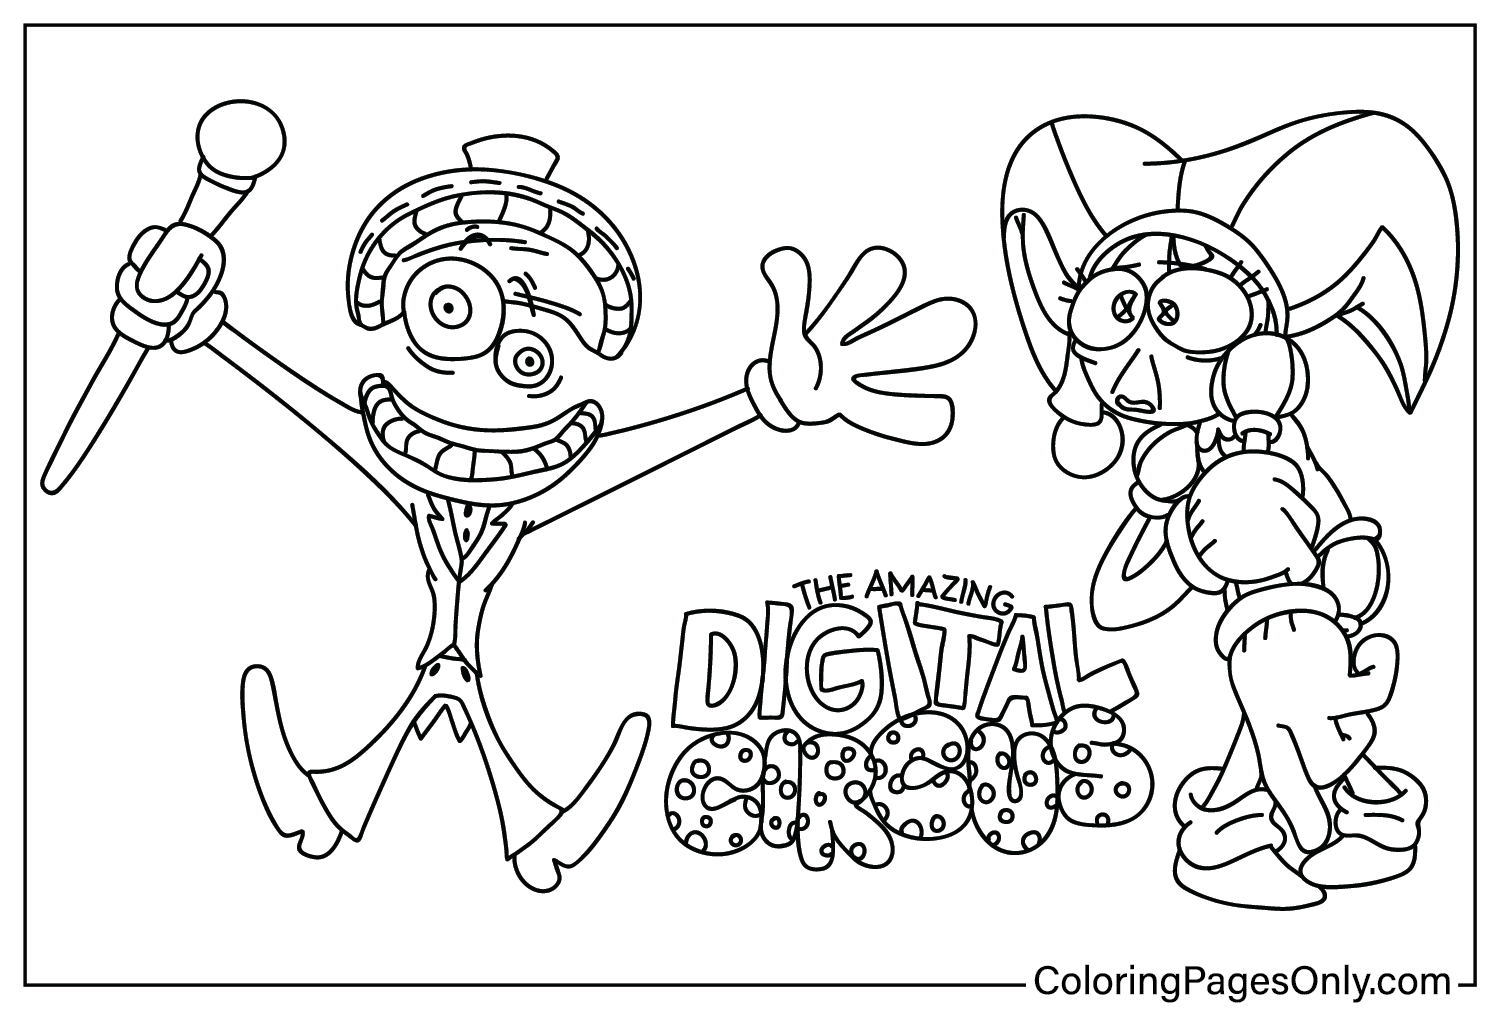 78 Free Printable The Amazing Digital Circus Coloring Pages